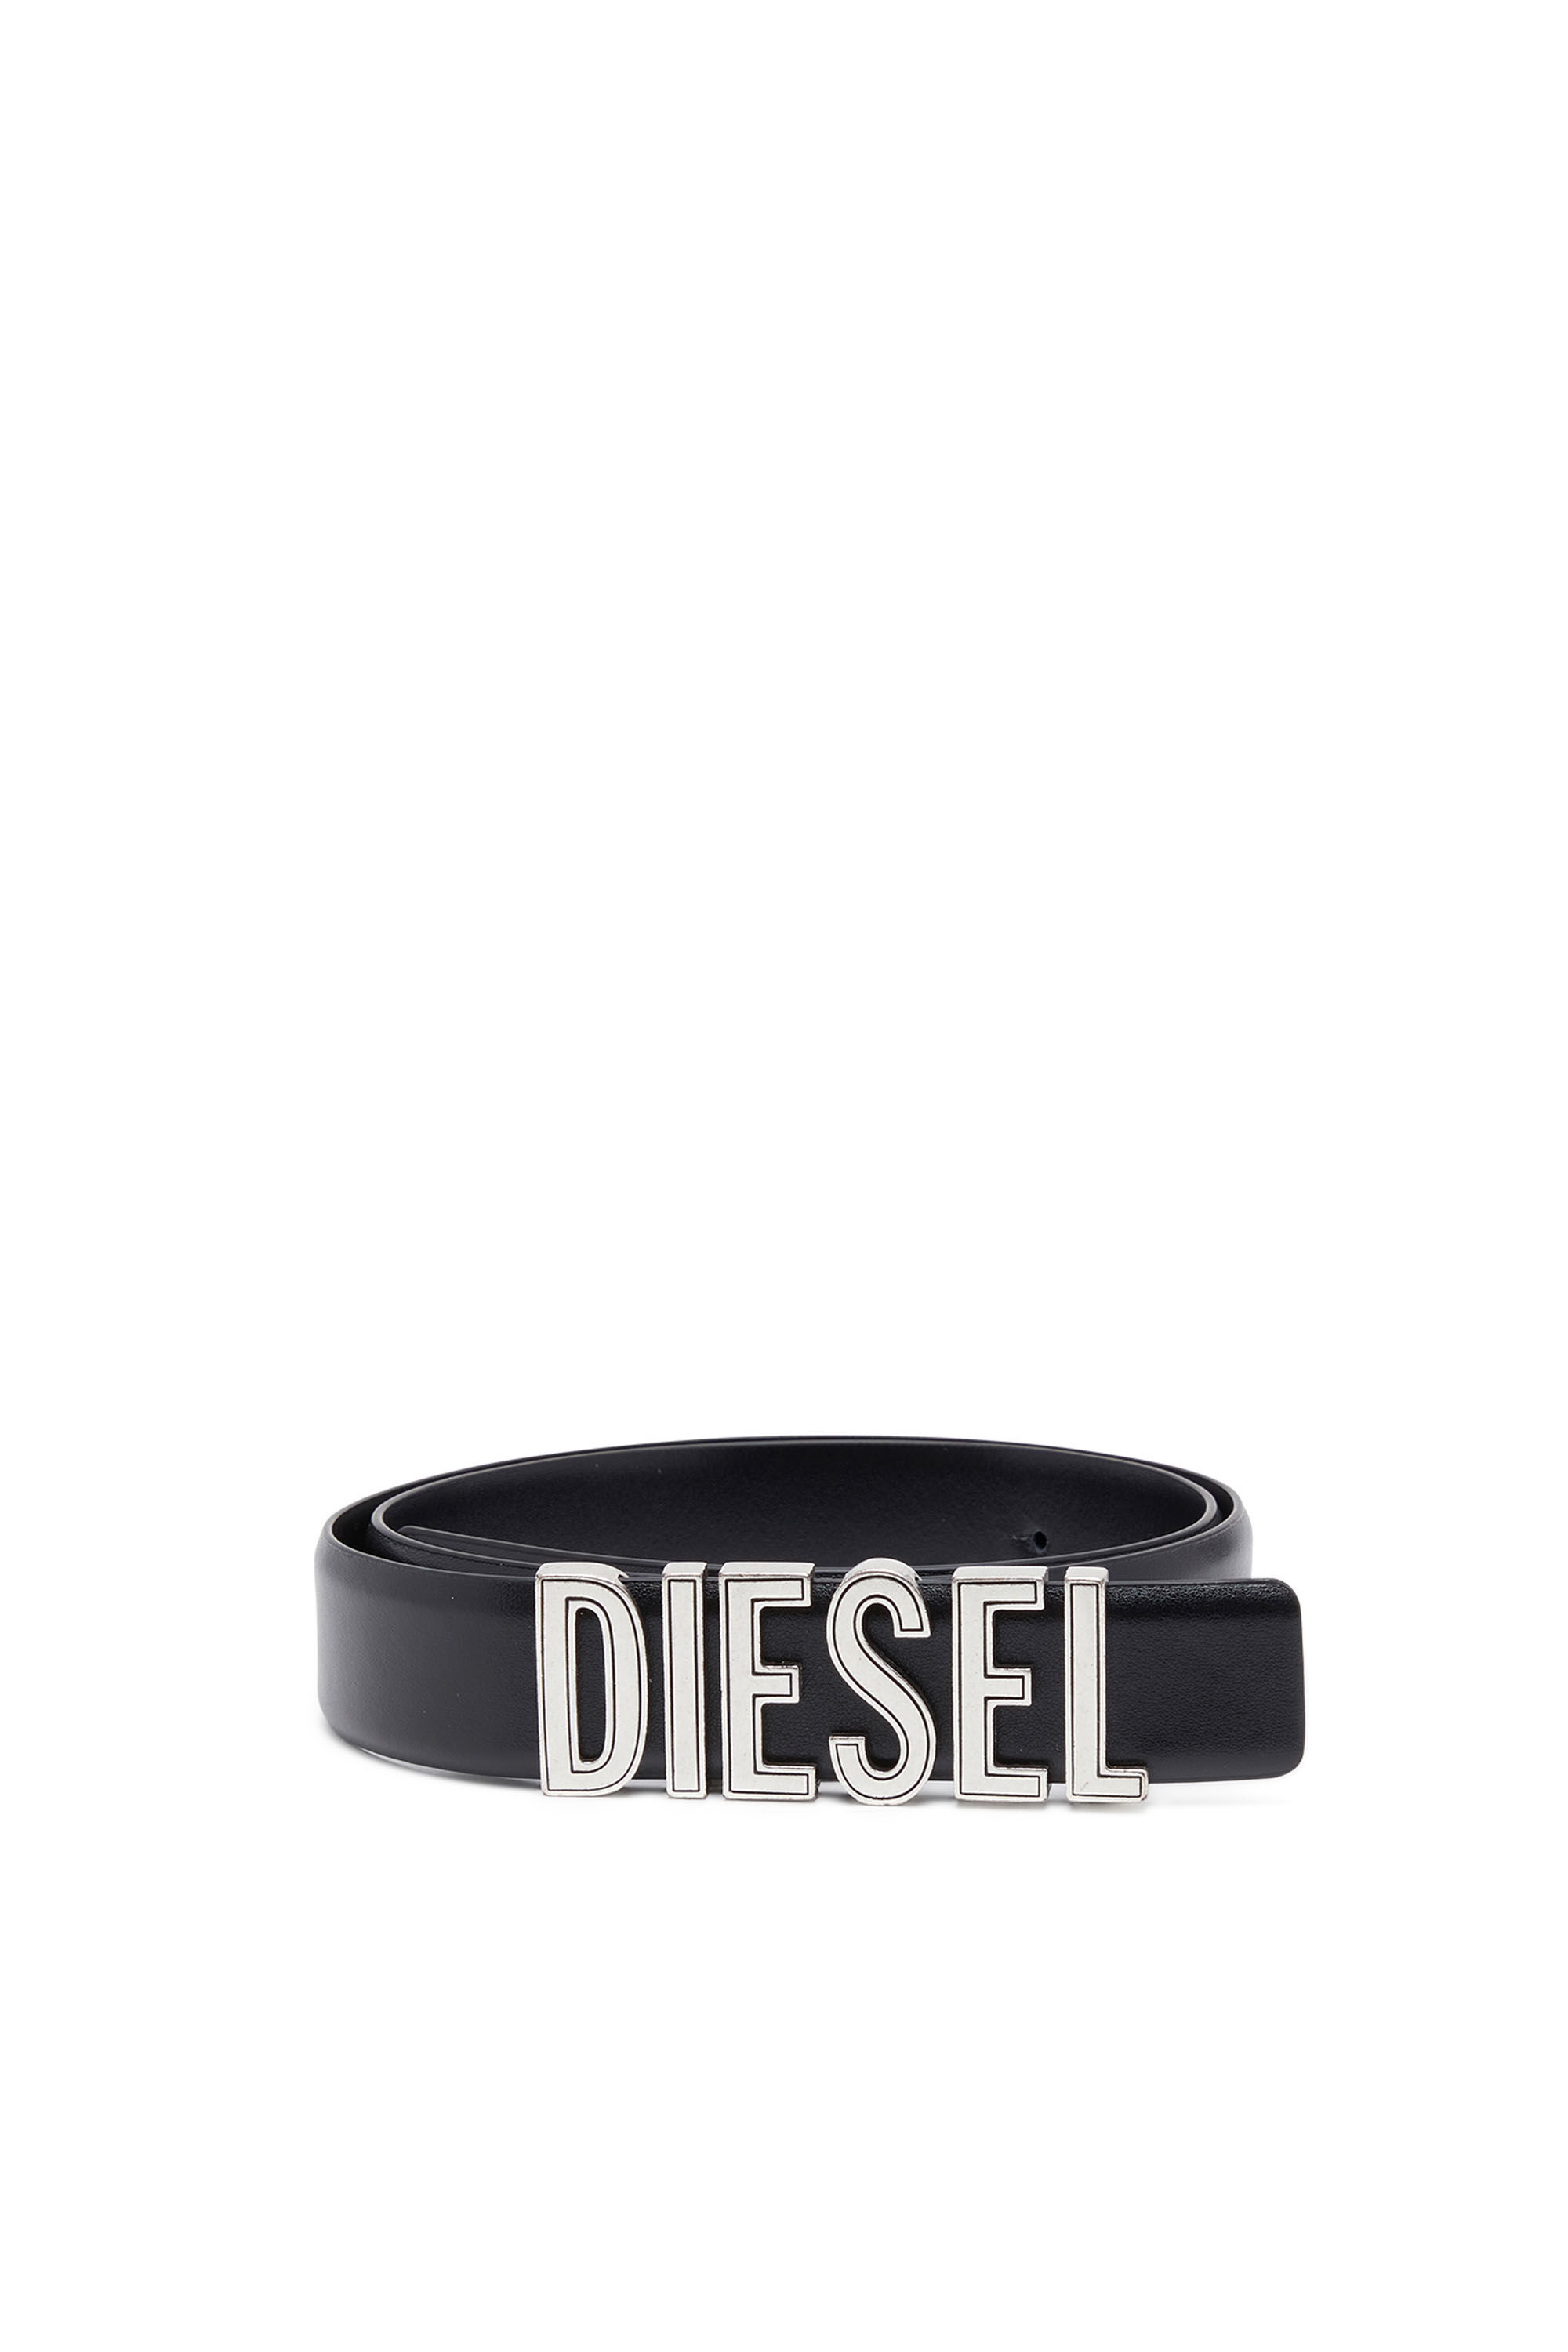 Women's Leather belt with chunky logo letters | Black | Diesel